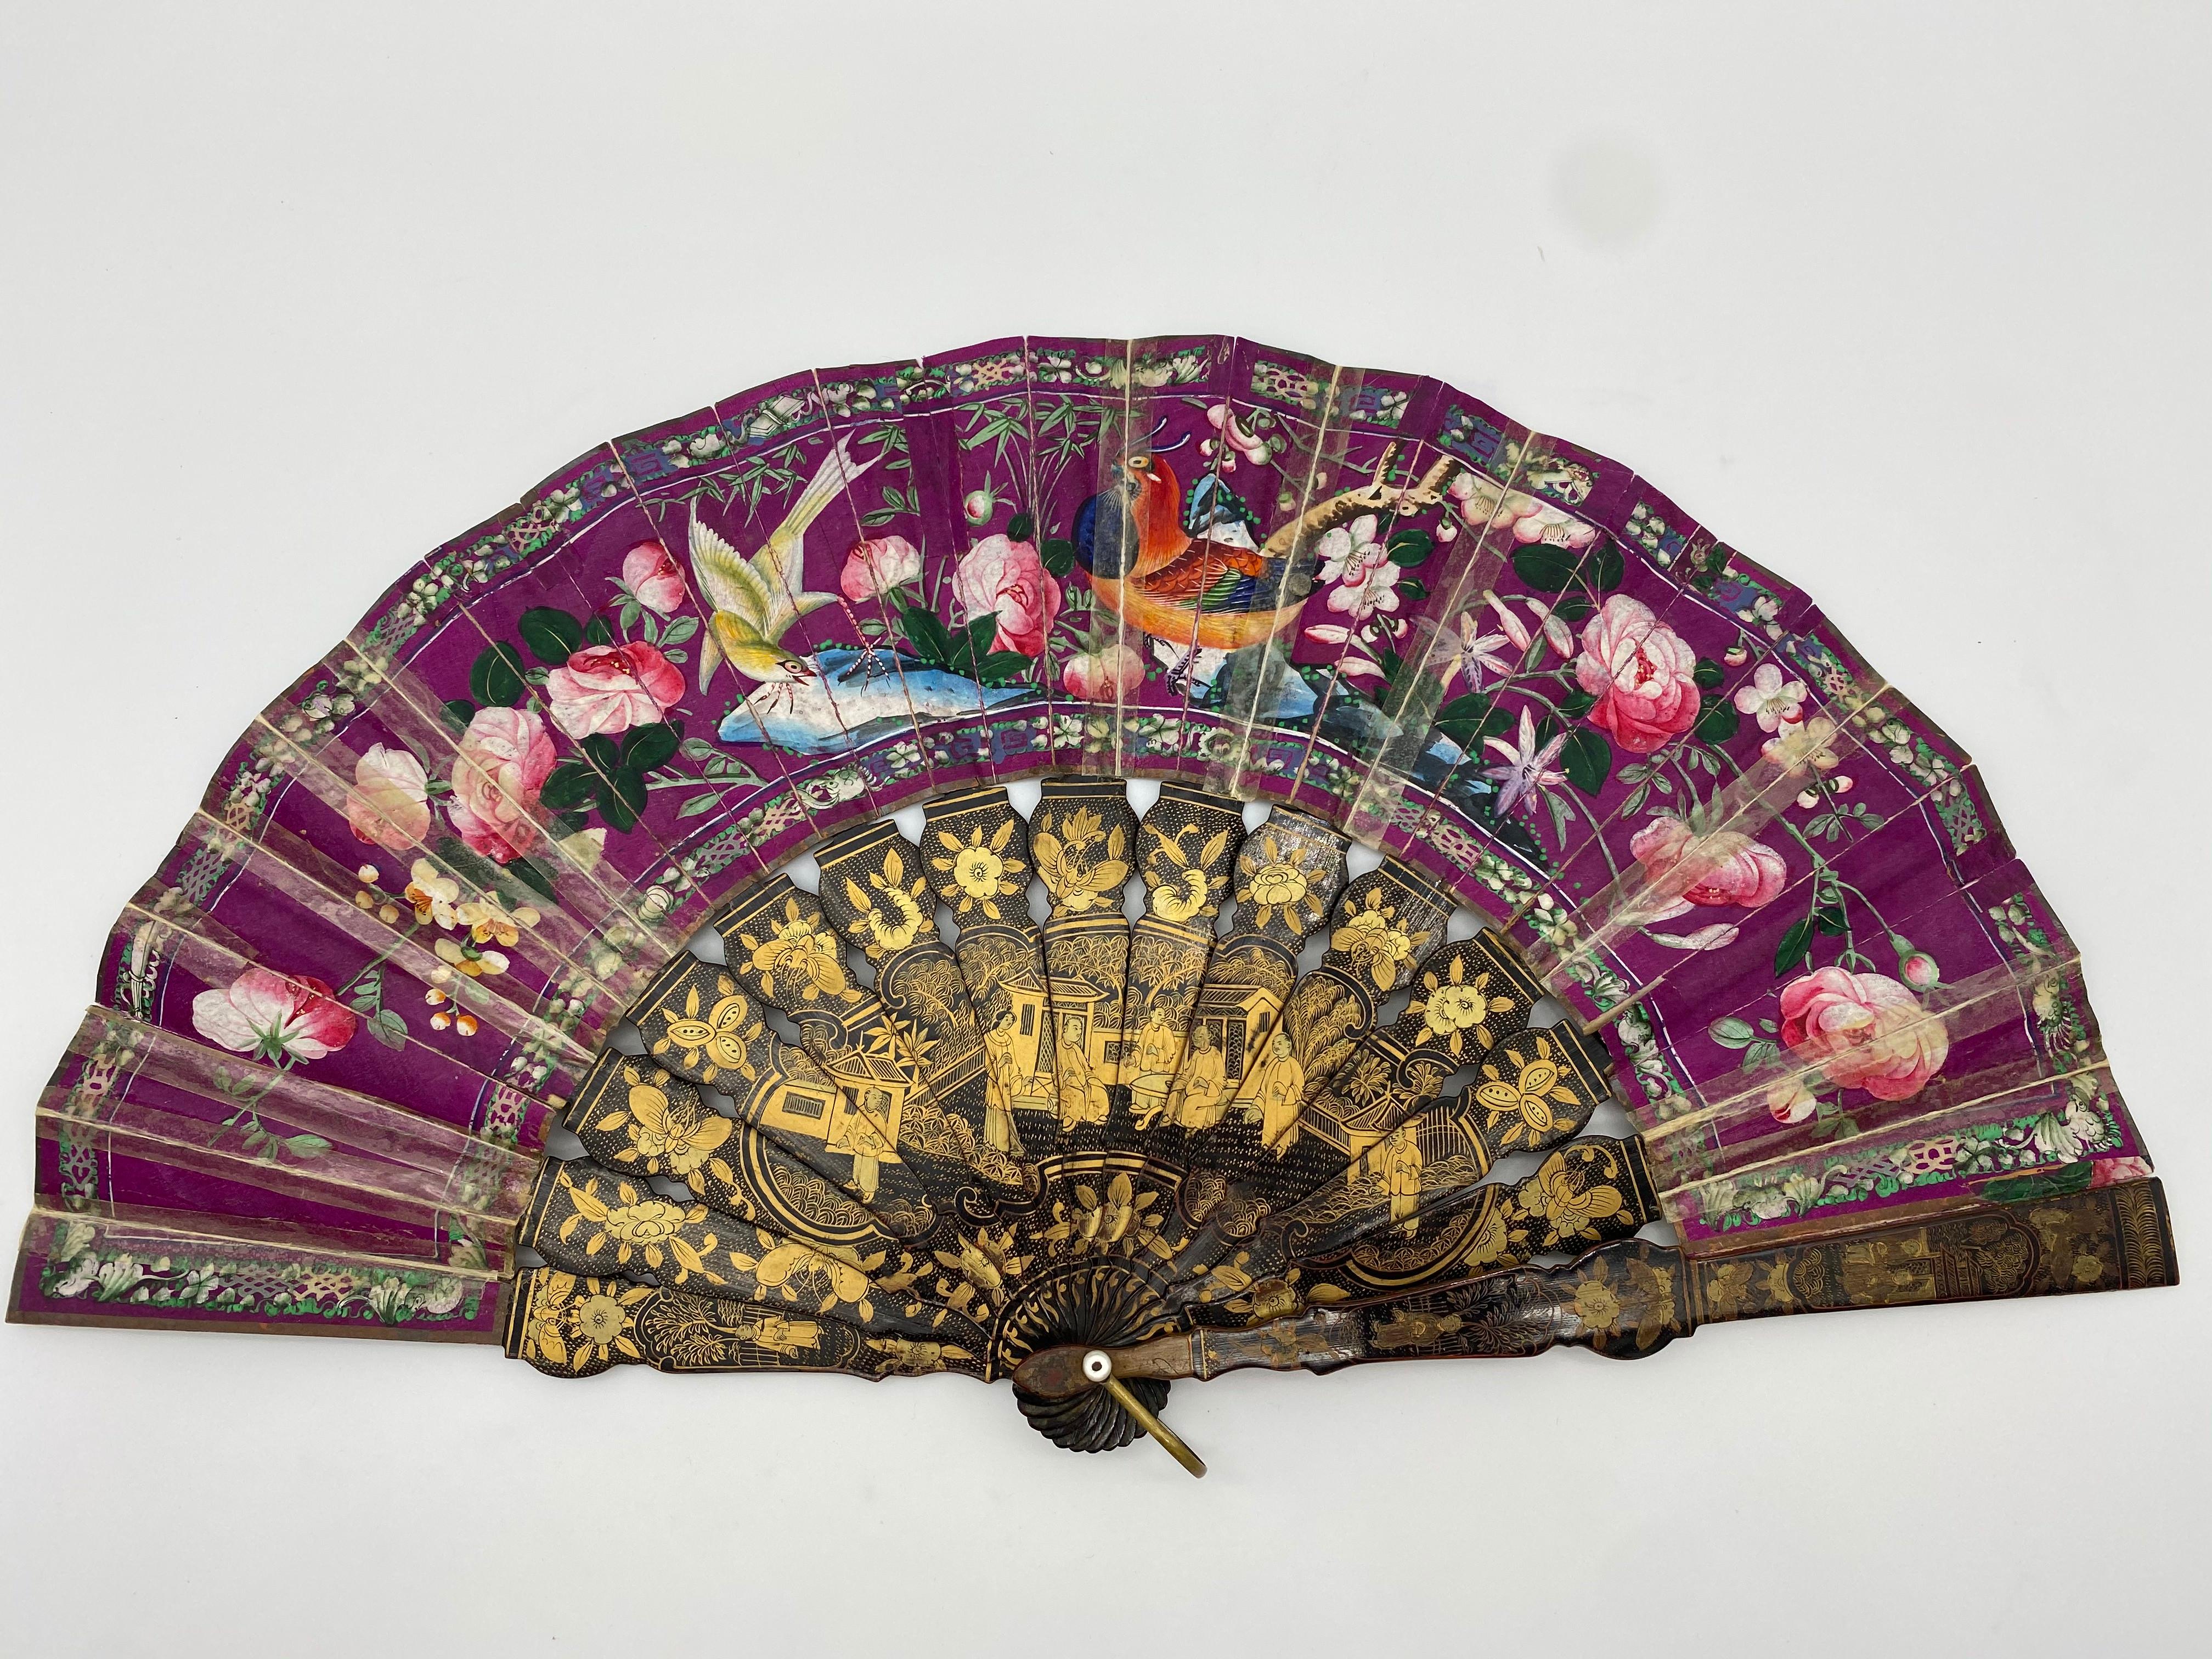 19th Century Chinese Gilt Lacquer Fan with Landscape 100 Faces 2